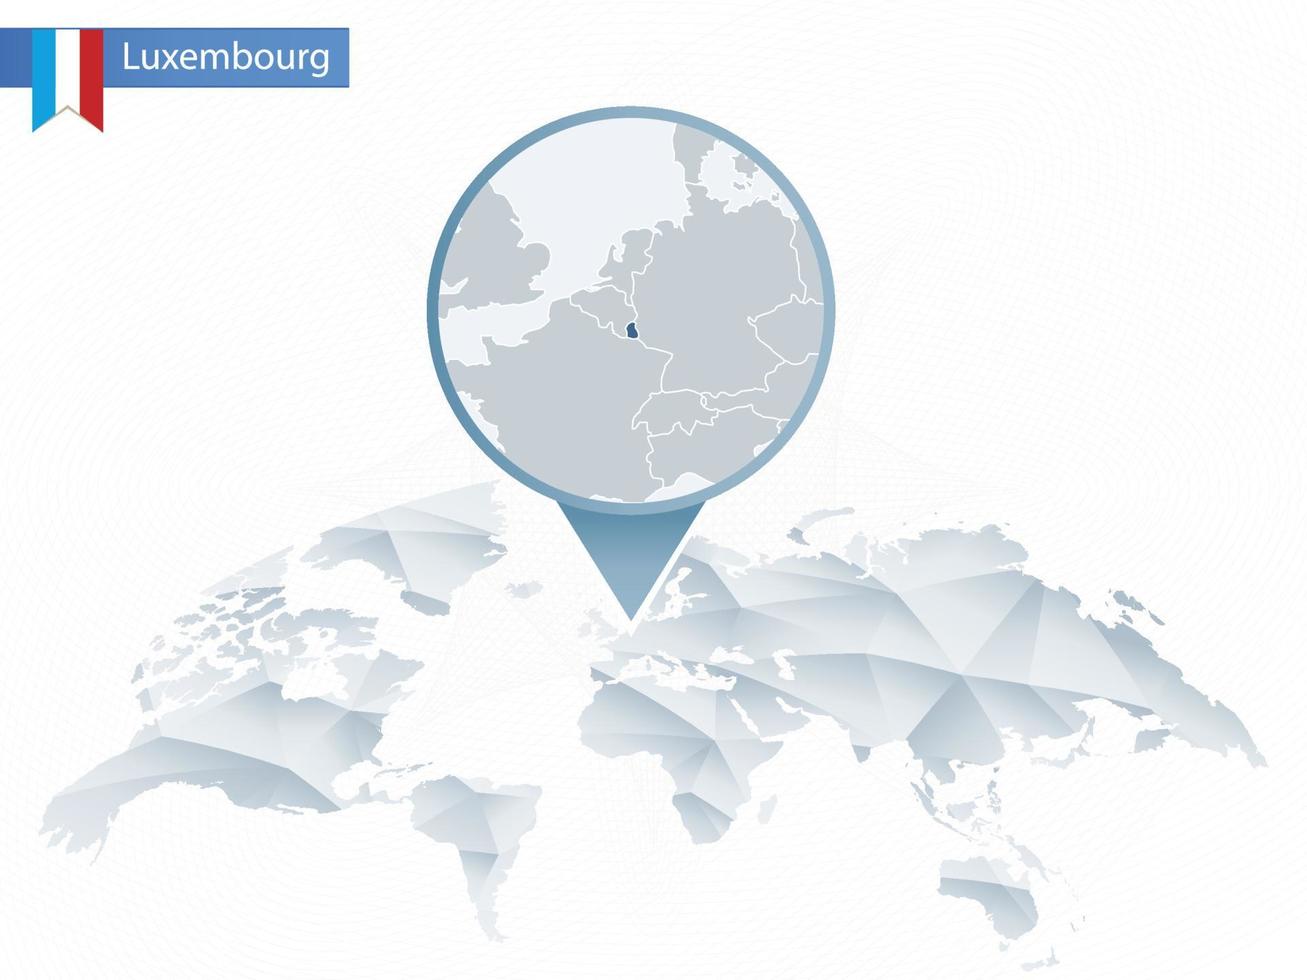 Abstract rounded World Map with pinned detailed Luxembourg map. vector